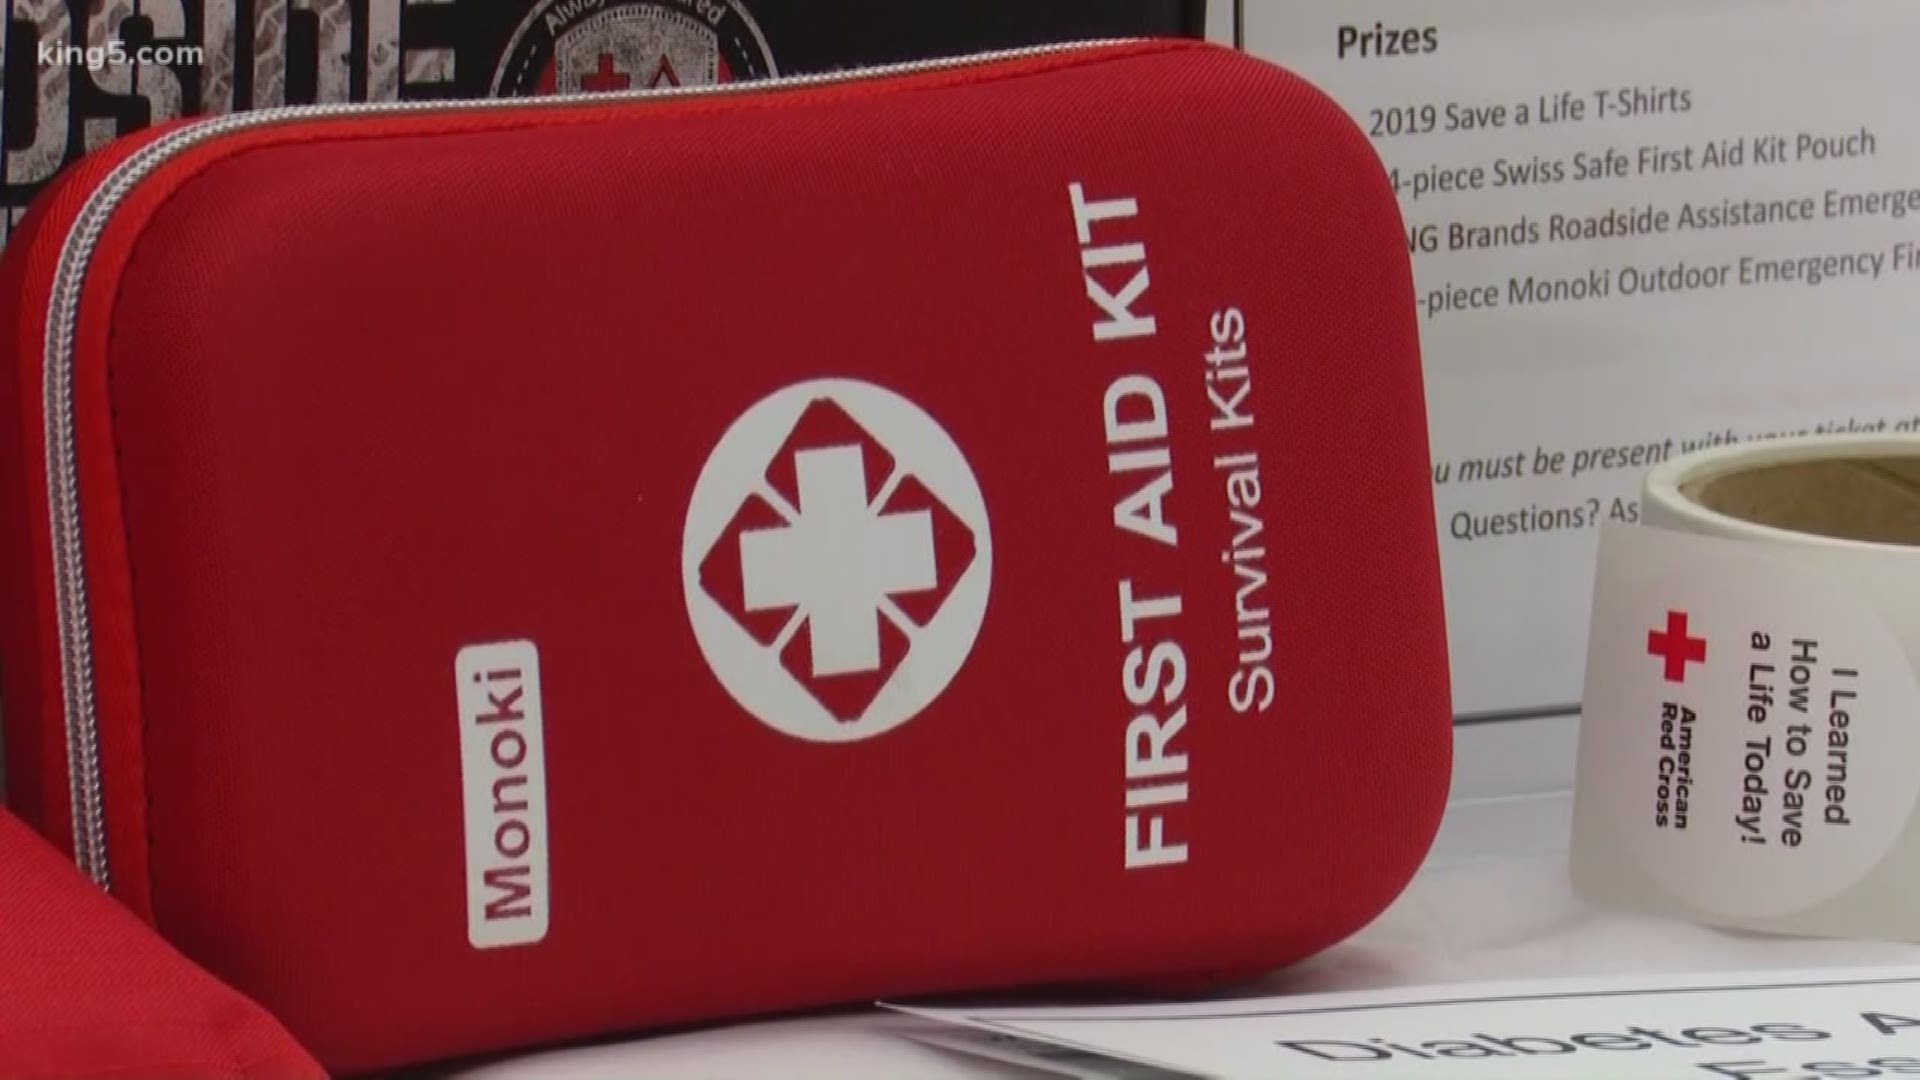 A student at Enumclaw High School is looking out for her community. She wants to make sure people are prepared for a medical emergency with skills that she had to use to help one of her own classmates.